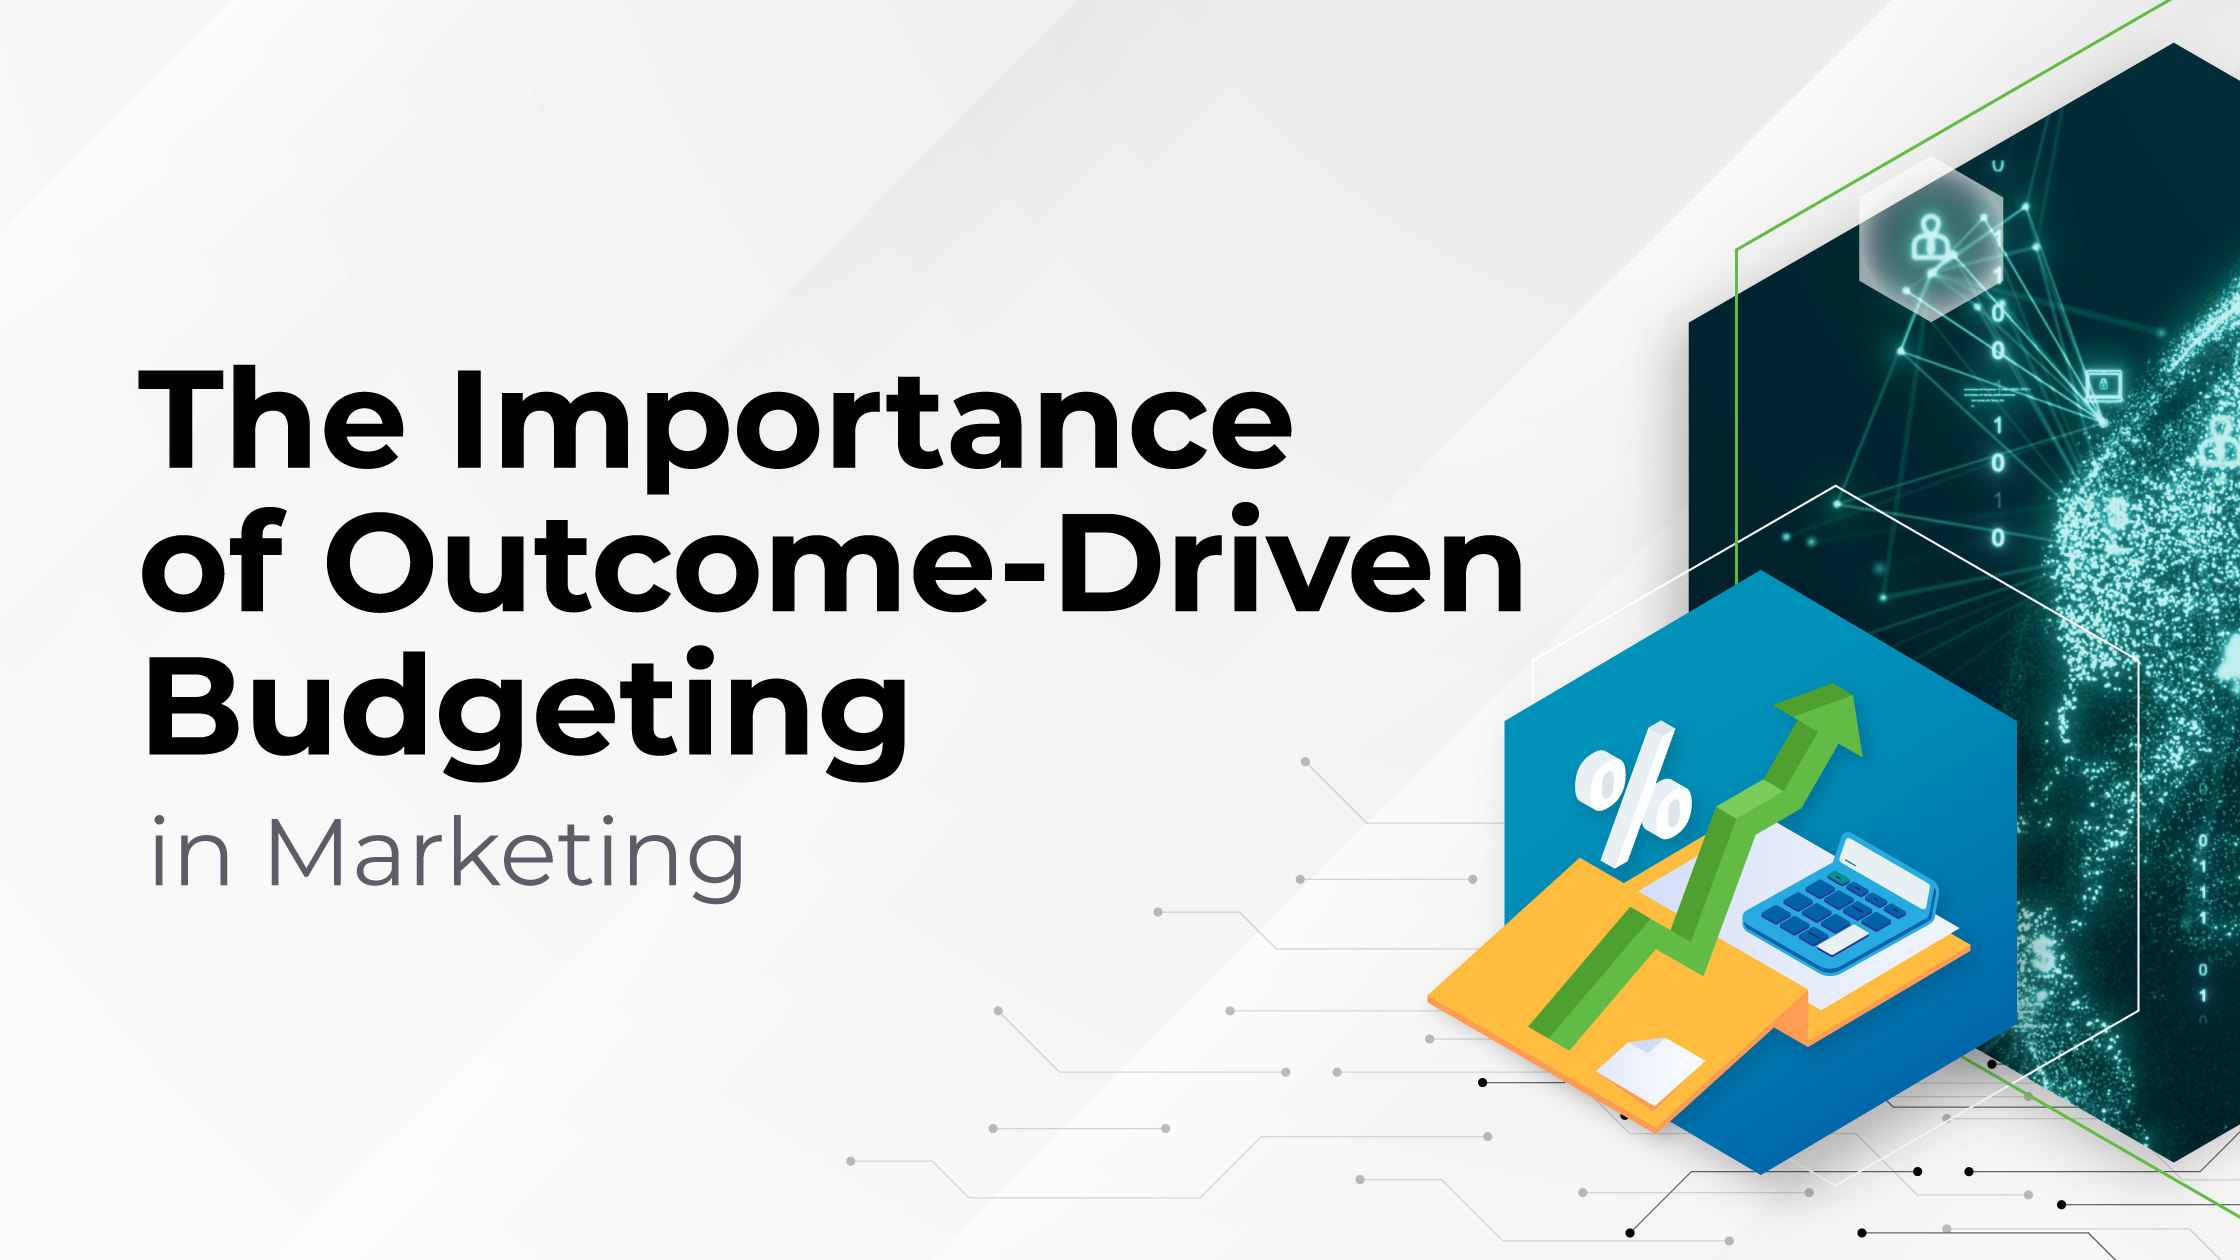 The Importance of Outcome-Driven Budgeting in Marketing